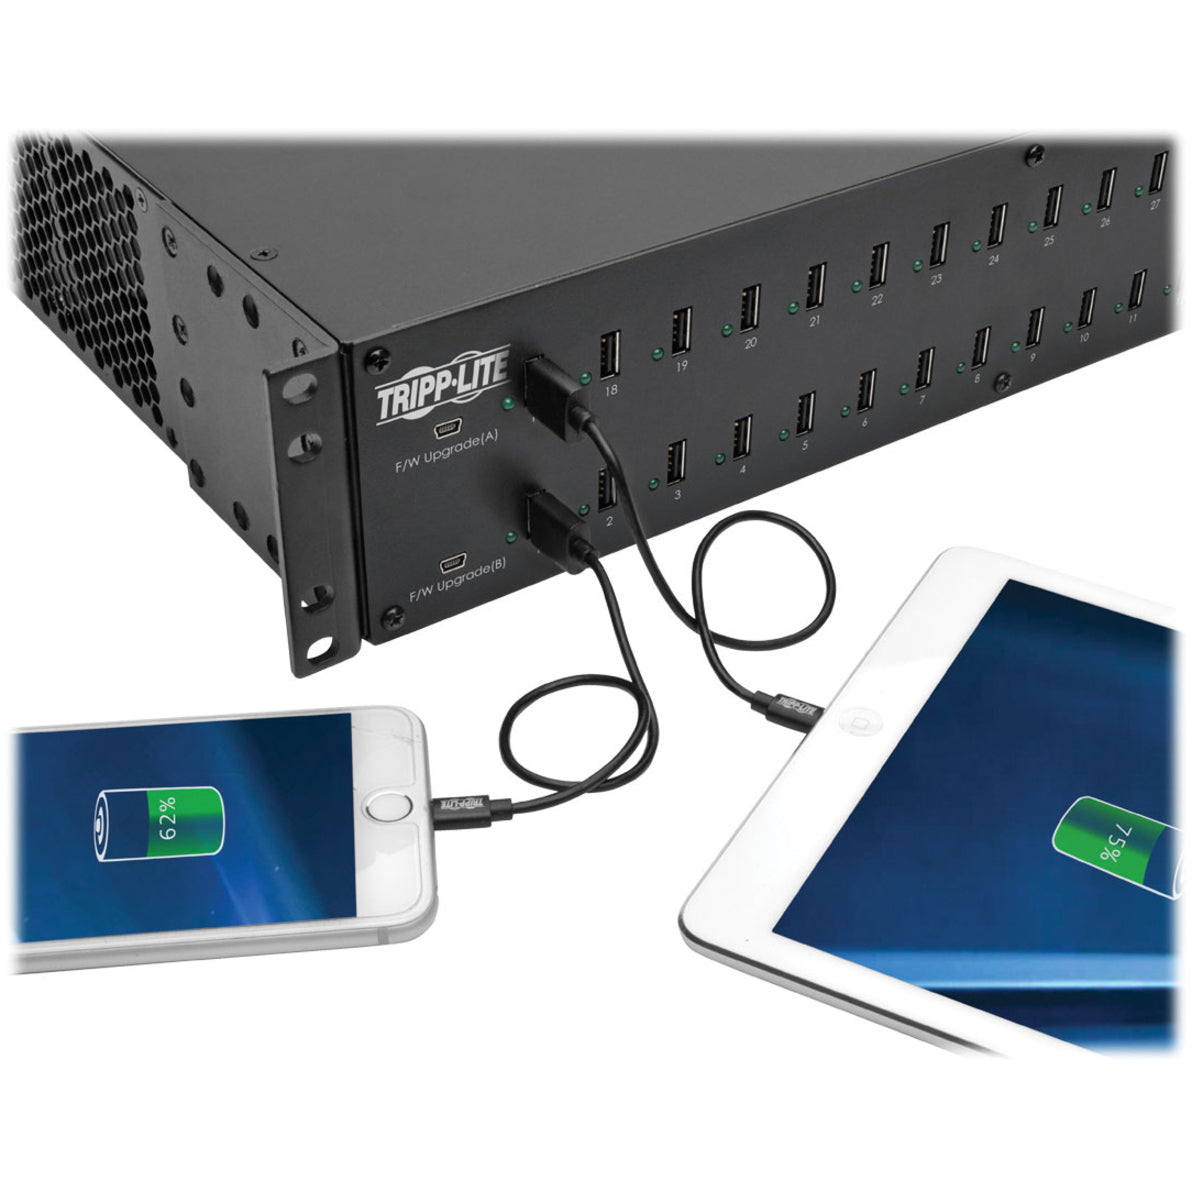 Tripp Lite U280-032-RM Cradle, 32-Port USB Charging Station with Syncing, 5V 80A (400W) USB Charger Output